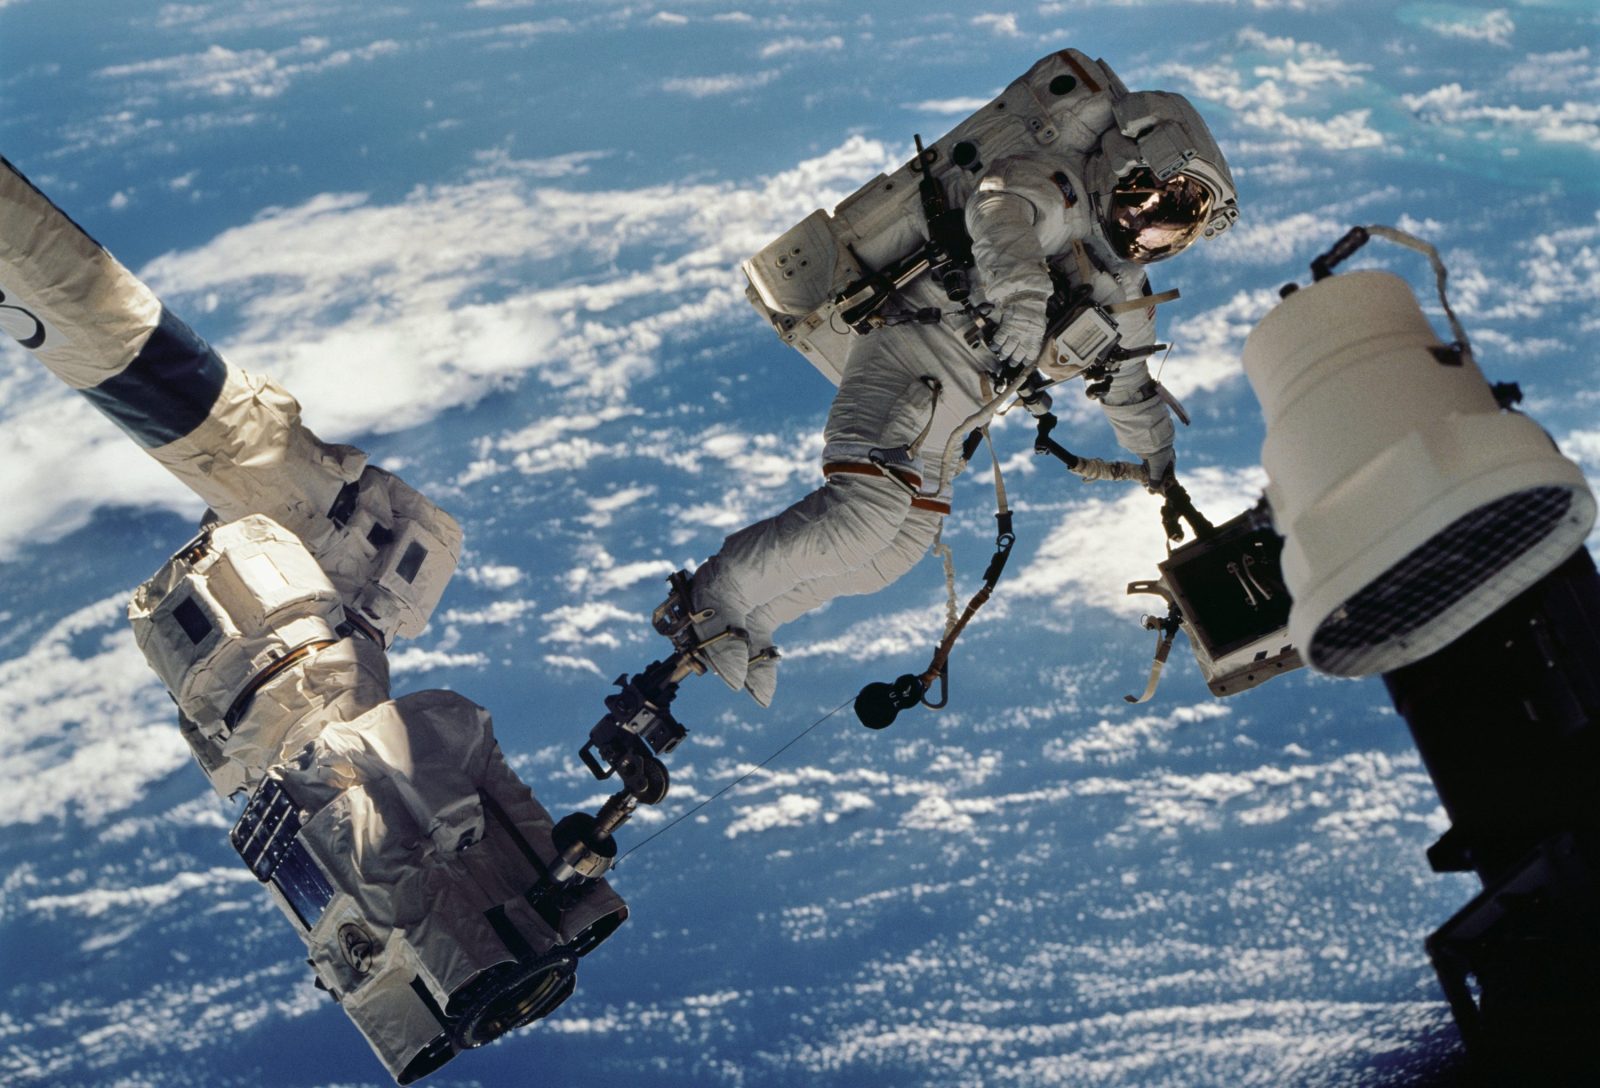 ASTRONAUT WOLF, DAVID-A. STS-112 MISSION SPECIALIST, ANCHORED TO A FOOT RESTRAINT ON SPACE STATION REMOTE MANIPULATOR SYSTEM (SSRMS) OR CANADARM2, CARRIES THE STARBOARD ONE OUTBOARD NADIR EXTERNAL CAMERA.